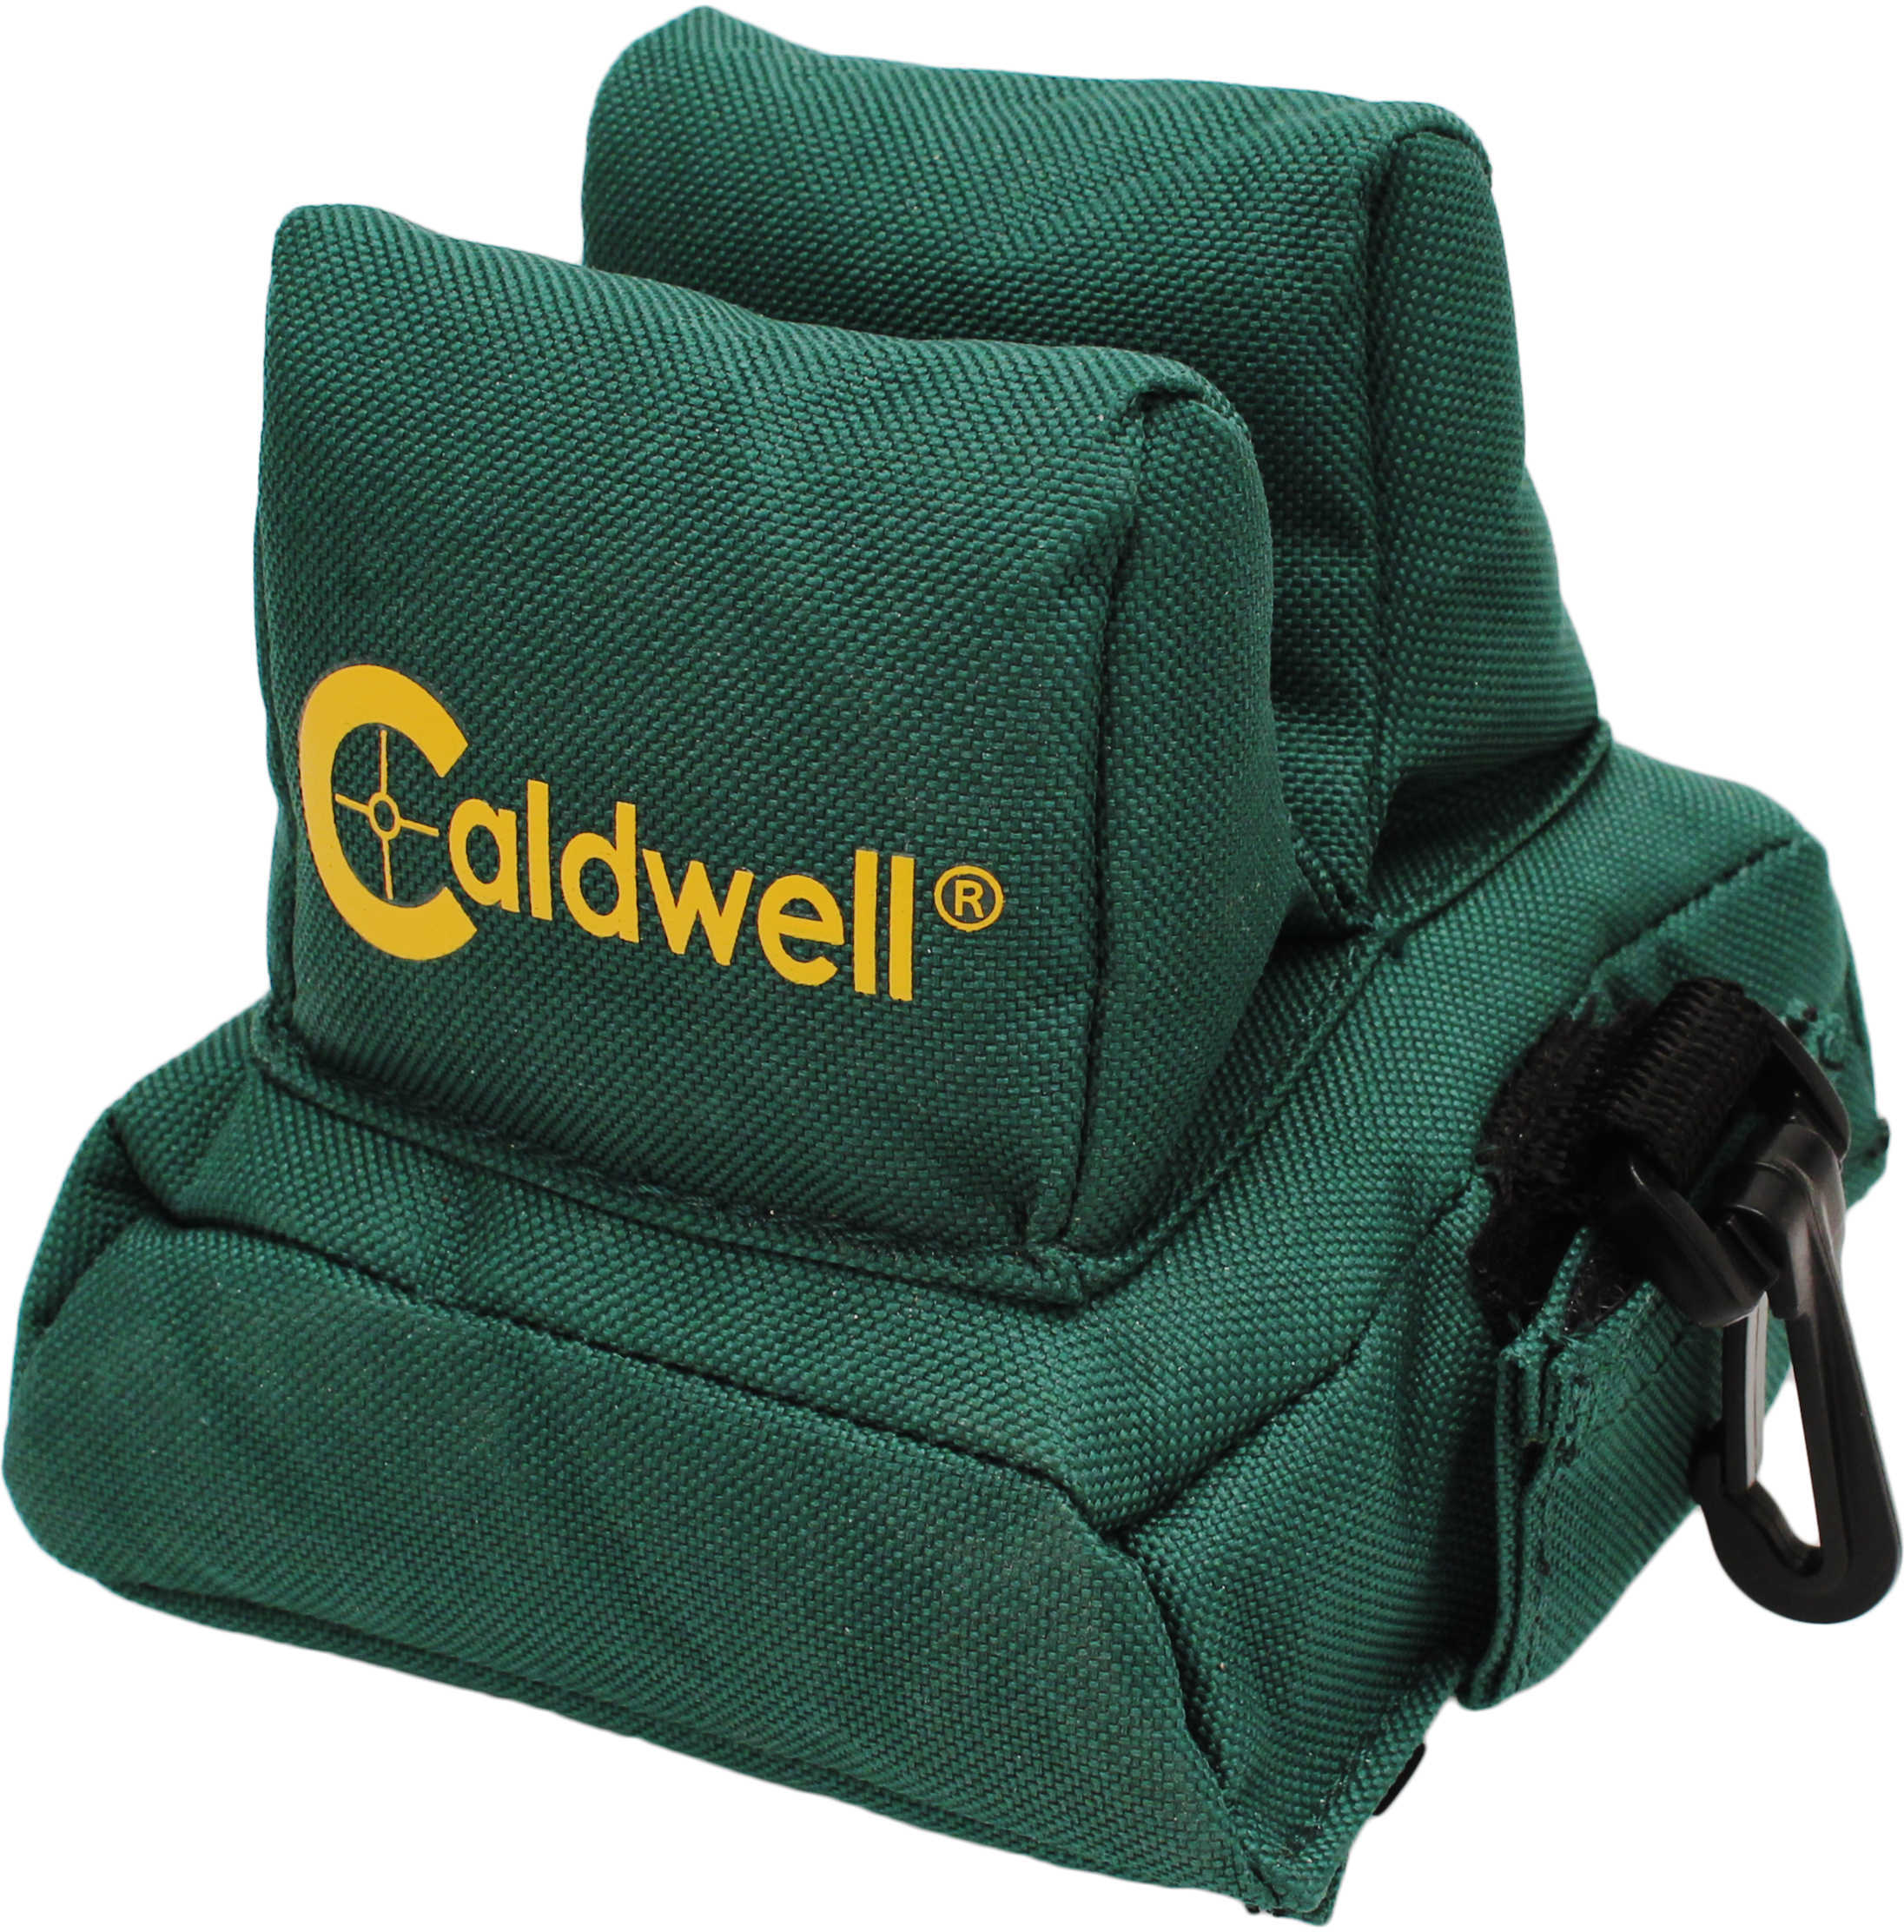 Past 640-721 DeadShot Rear Bag Filled 4.5"x5"x5" Green 600D Polyester